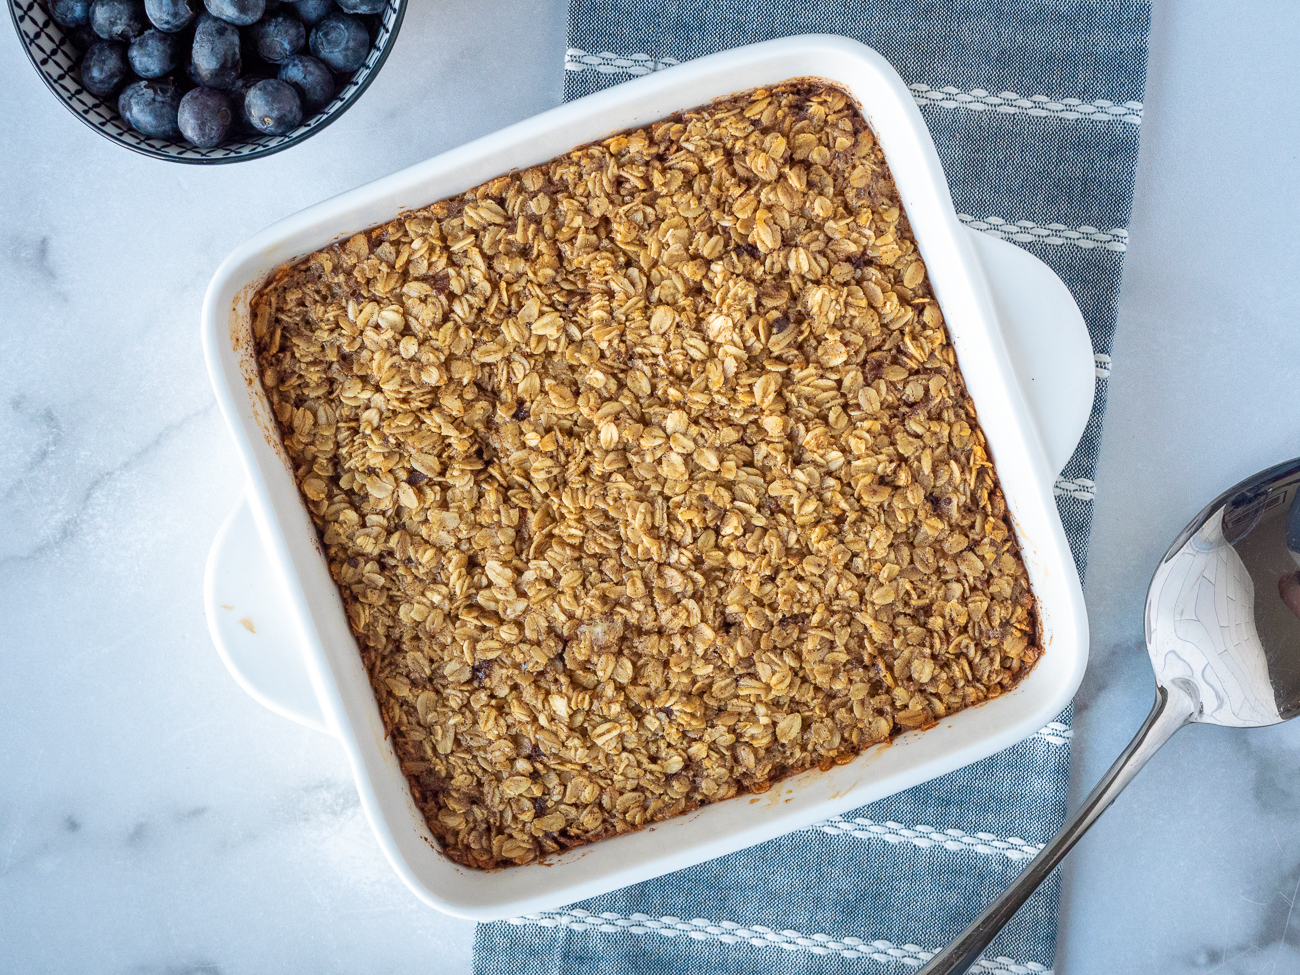 Baked Oatmeal Recipe - Cooking Classy